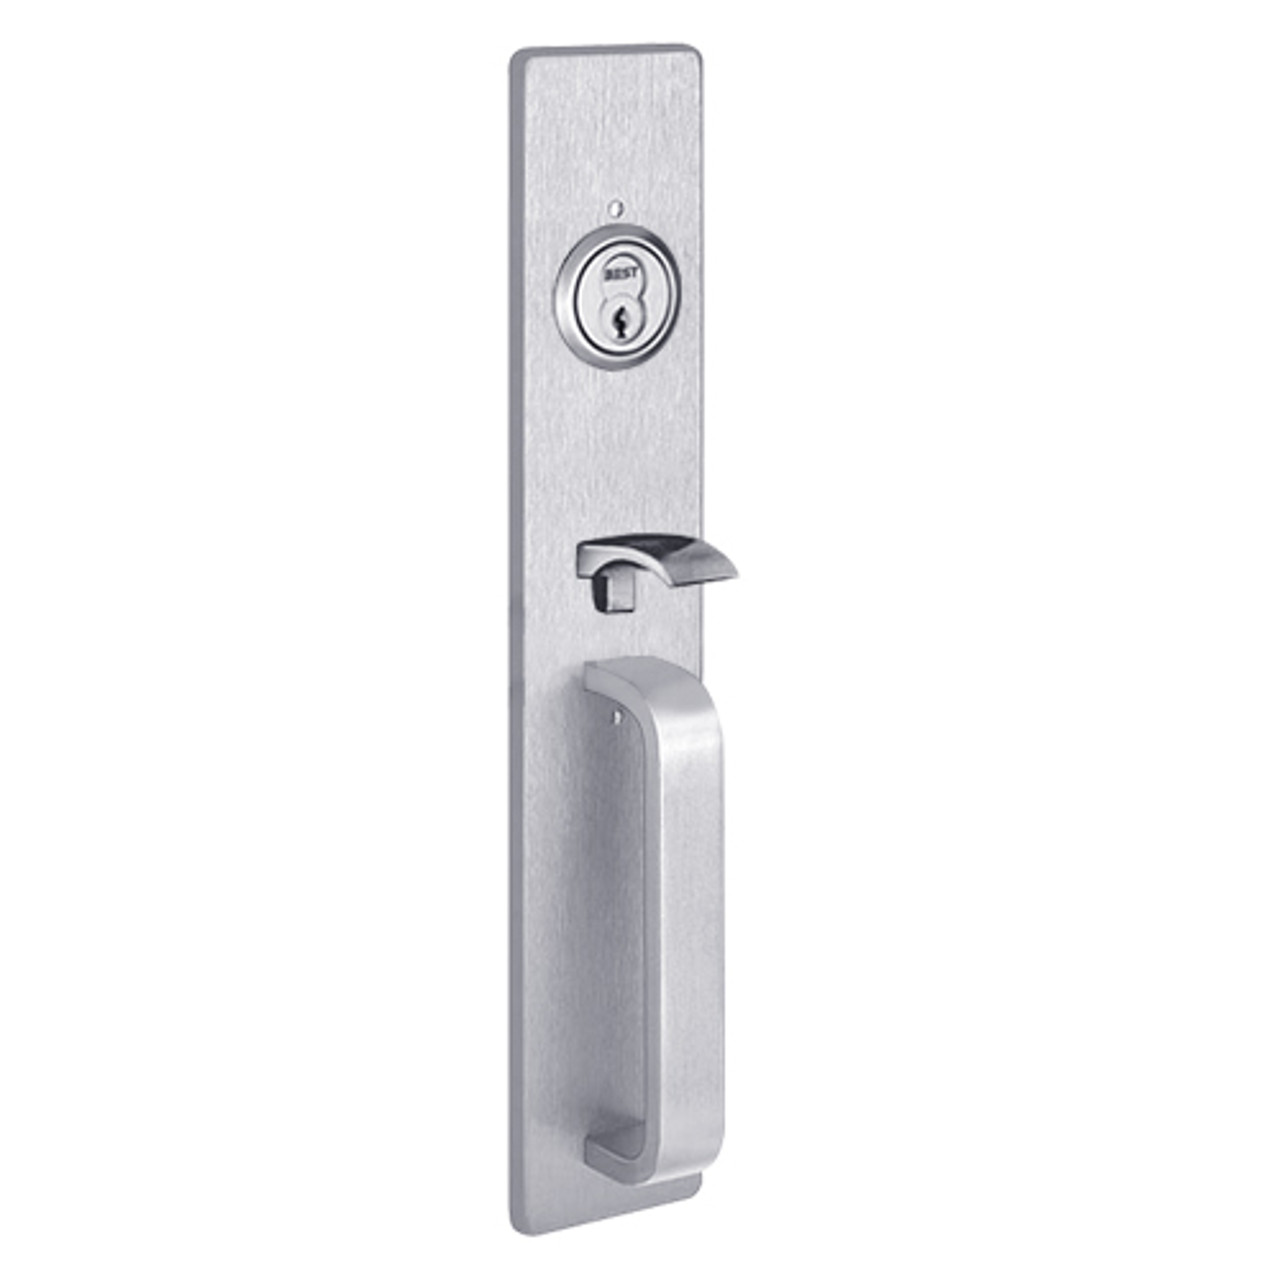 C1705A-625 PHI Key Controls Thumb Piece Trim with A Design Pull for Concealed Vertical Rod Device in Bright Chrome Finish